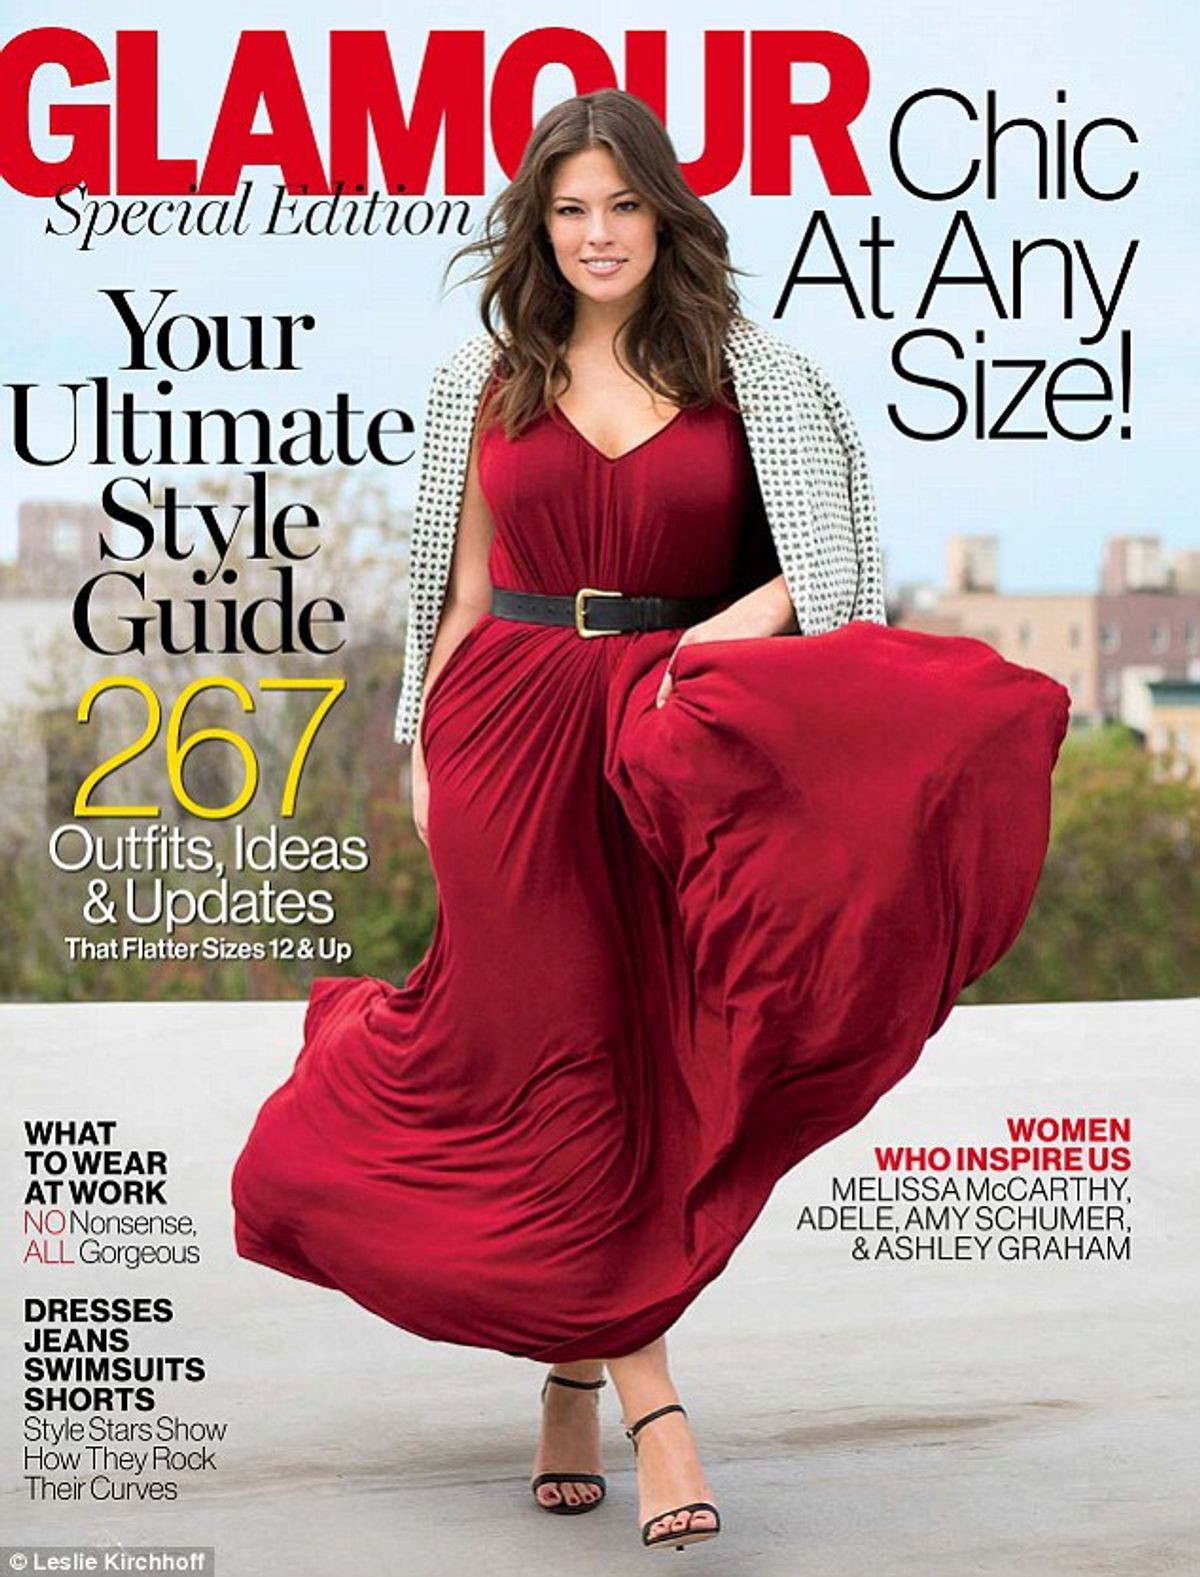 Glamour Magazine Features Amy Schumer In "Plus-Size" Special